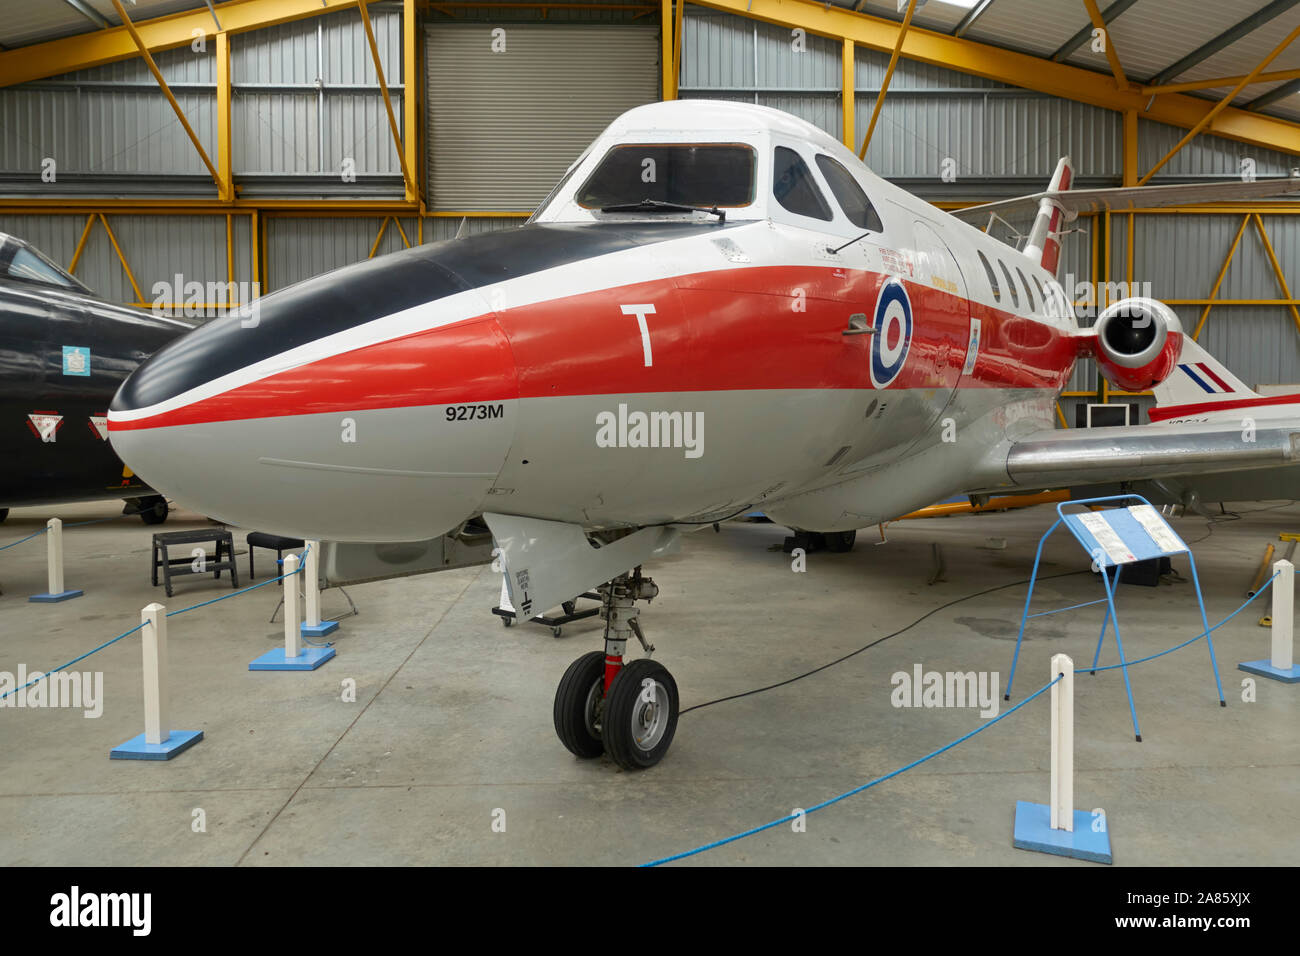 A Hawker Siddeley Dominie T1 aircraft on display at the Newark Air Museum, Nottinghamshire, England.It was used by the RAF as a navigation trainer. Stock Photo